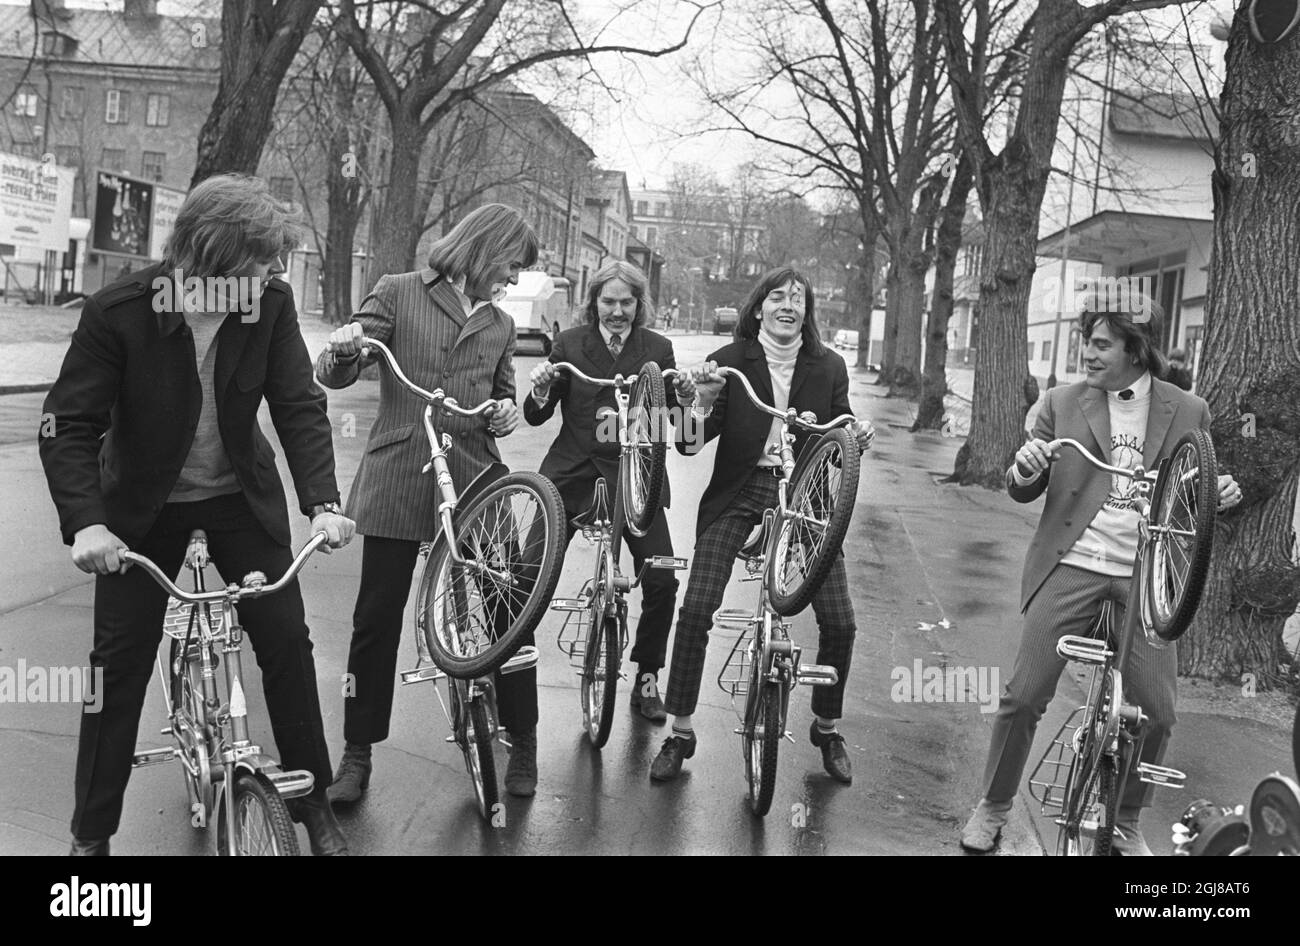 STOCKHOLM 1967-05-10 *For your files* Swedish pop group Hep Stars are seen  during a filming in Stockholm, Sweden May 5, 1967. Second from left is  future ABBA member Benny Andersson. Members from